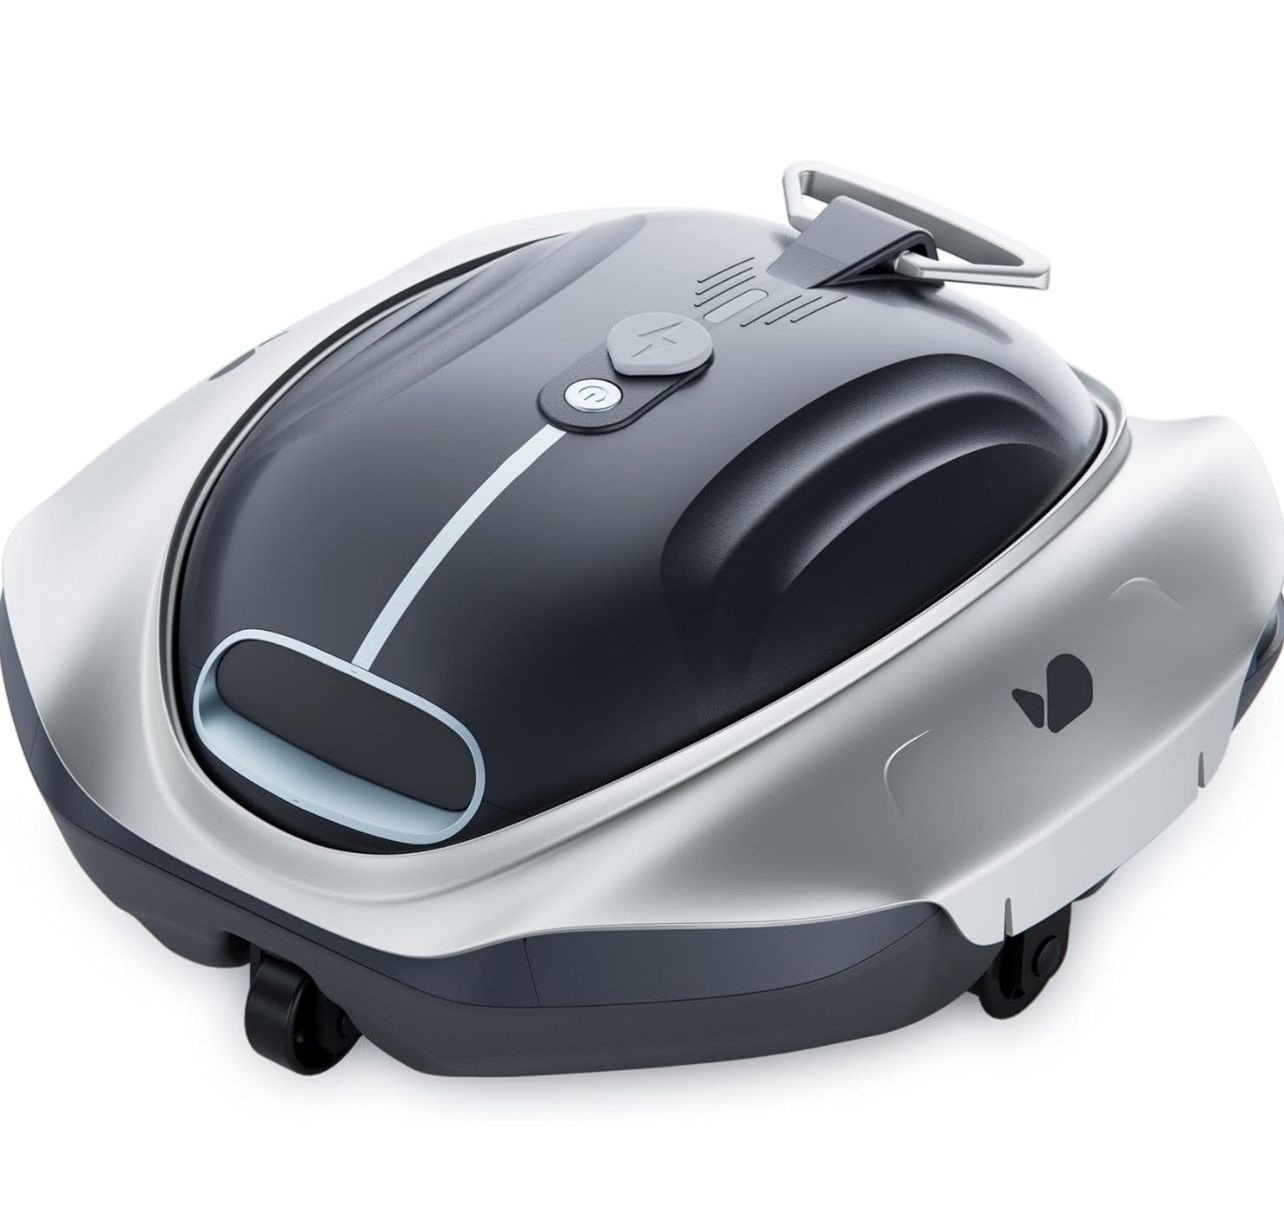 Bubot 300 Cordless Pool Vacuum-Pool Cleaner Robot with Powerful Suction